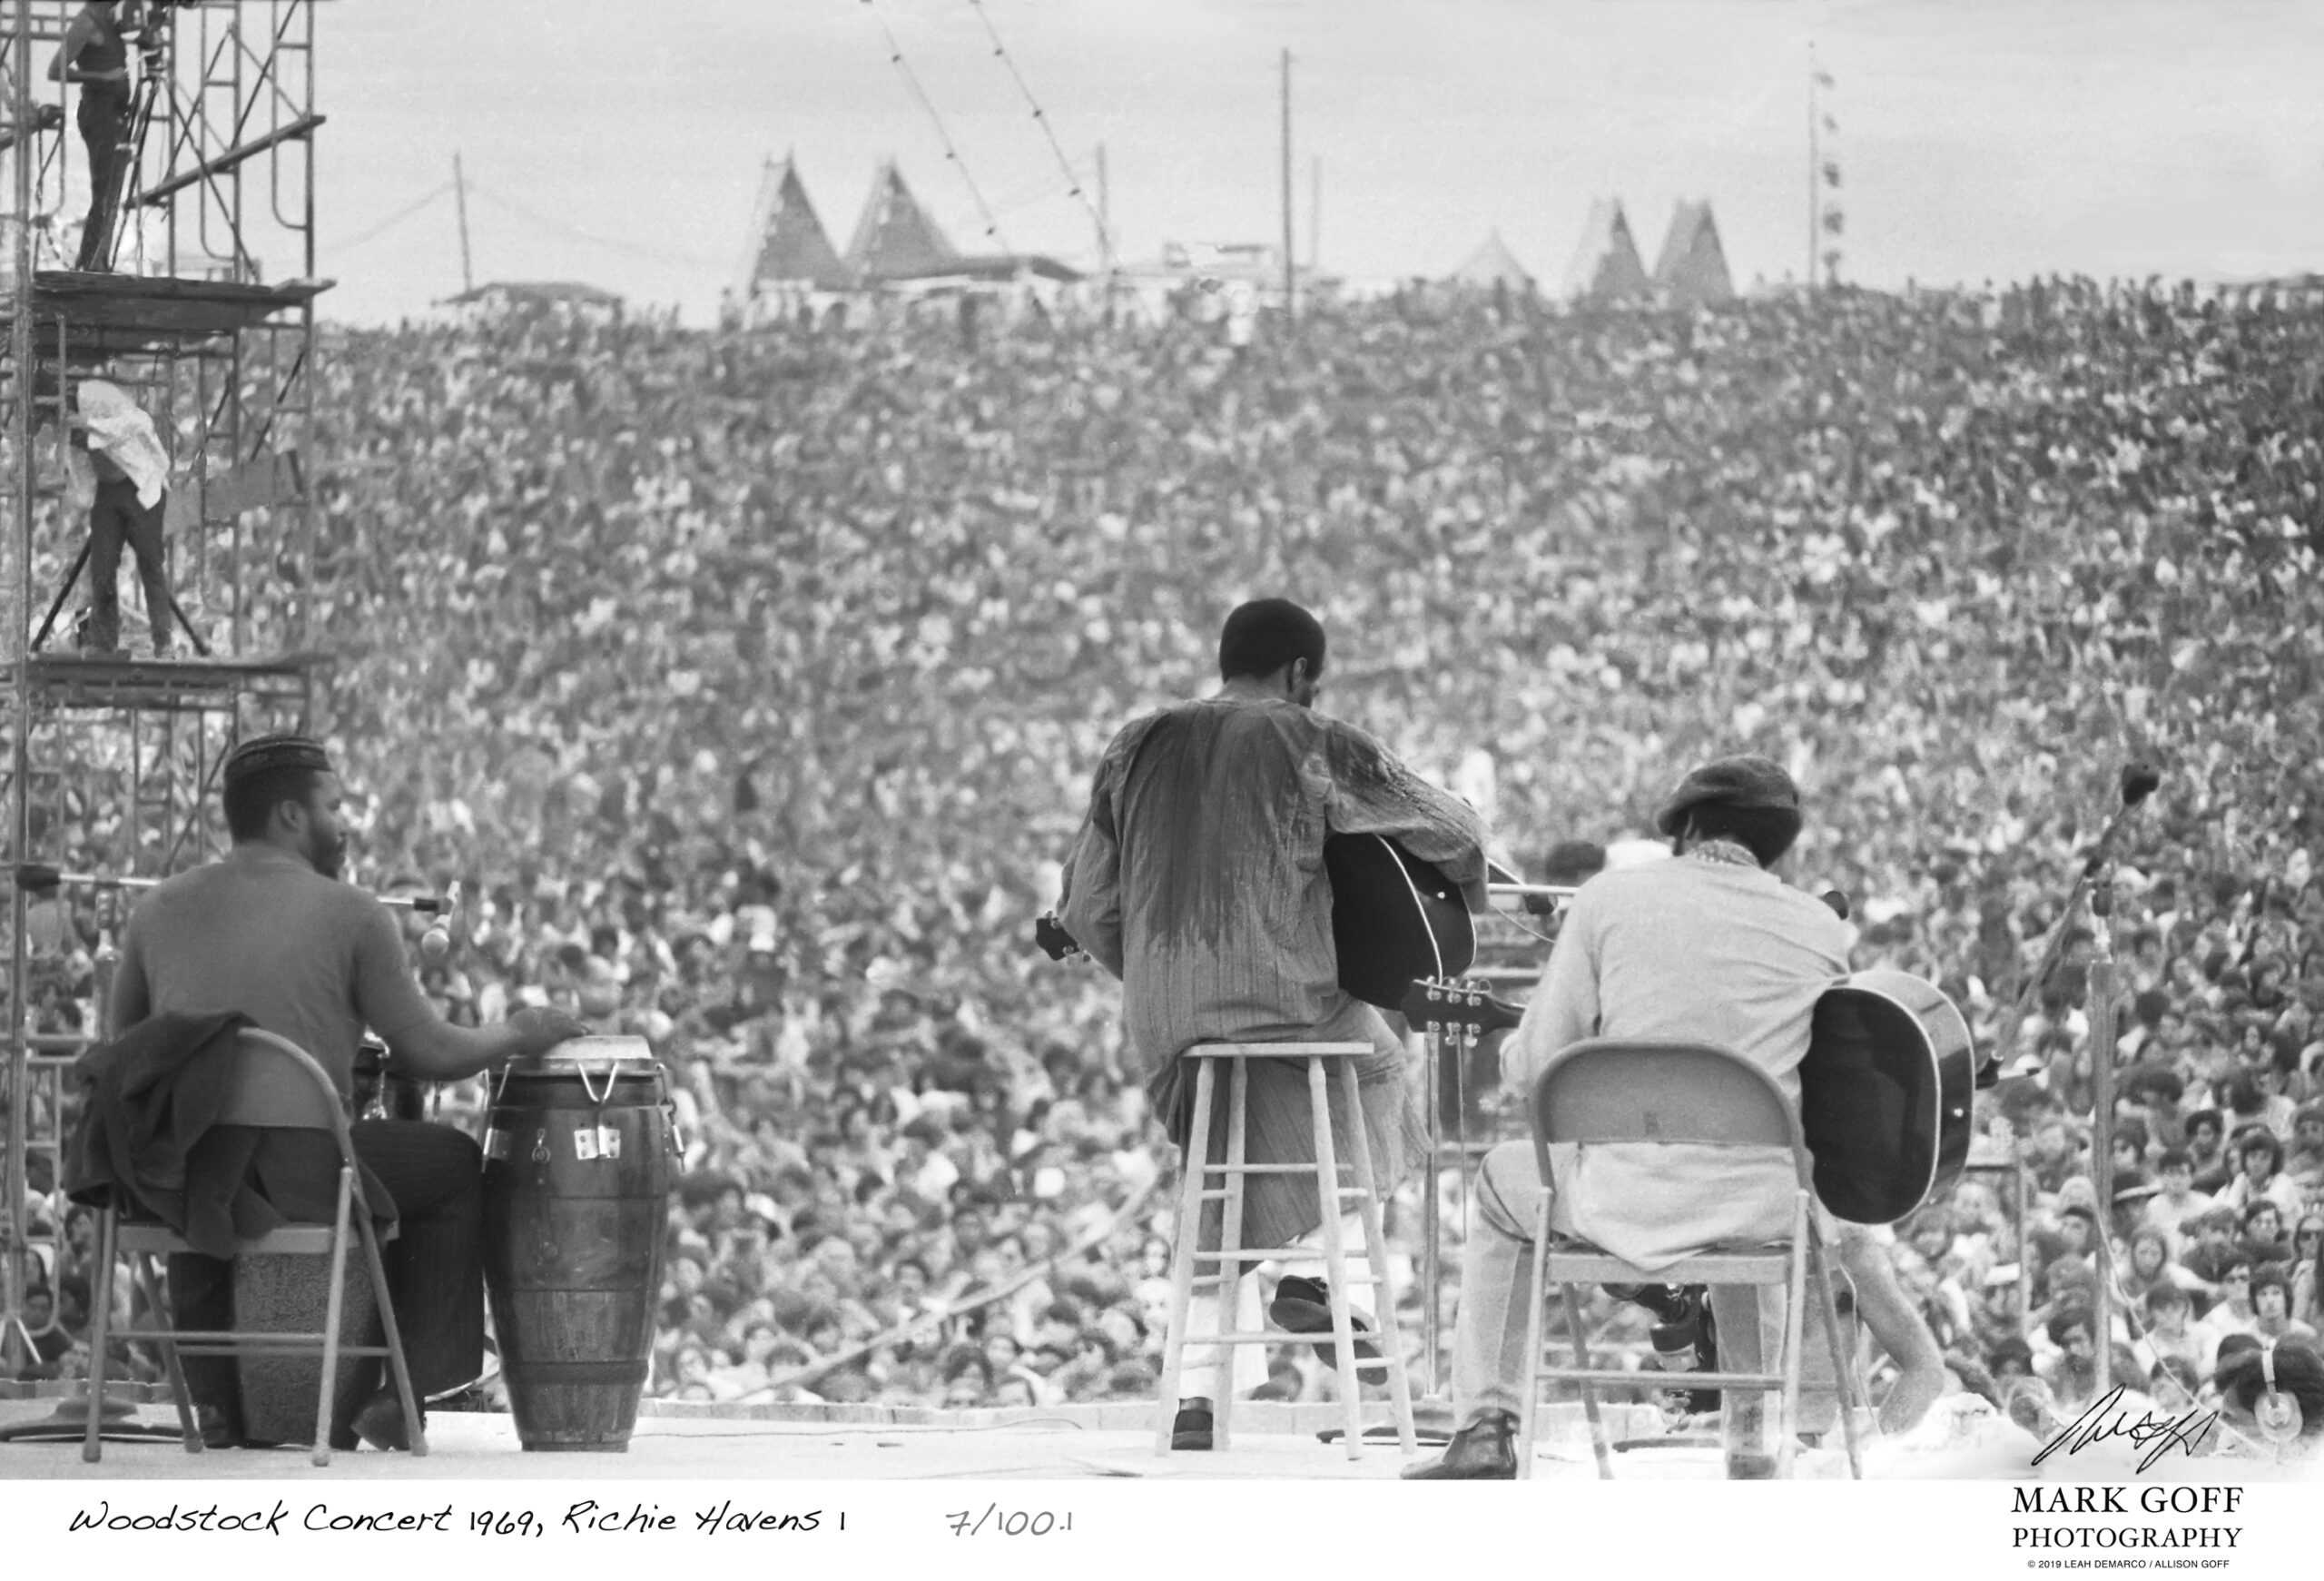 New Images Emerge Of Woodstock From Milwaukee Photographer